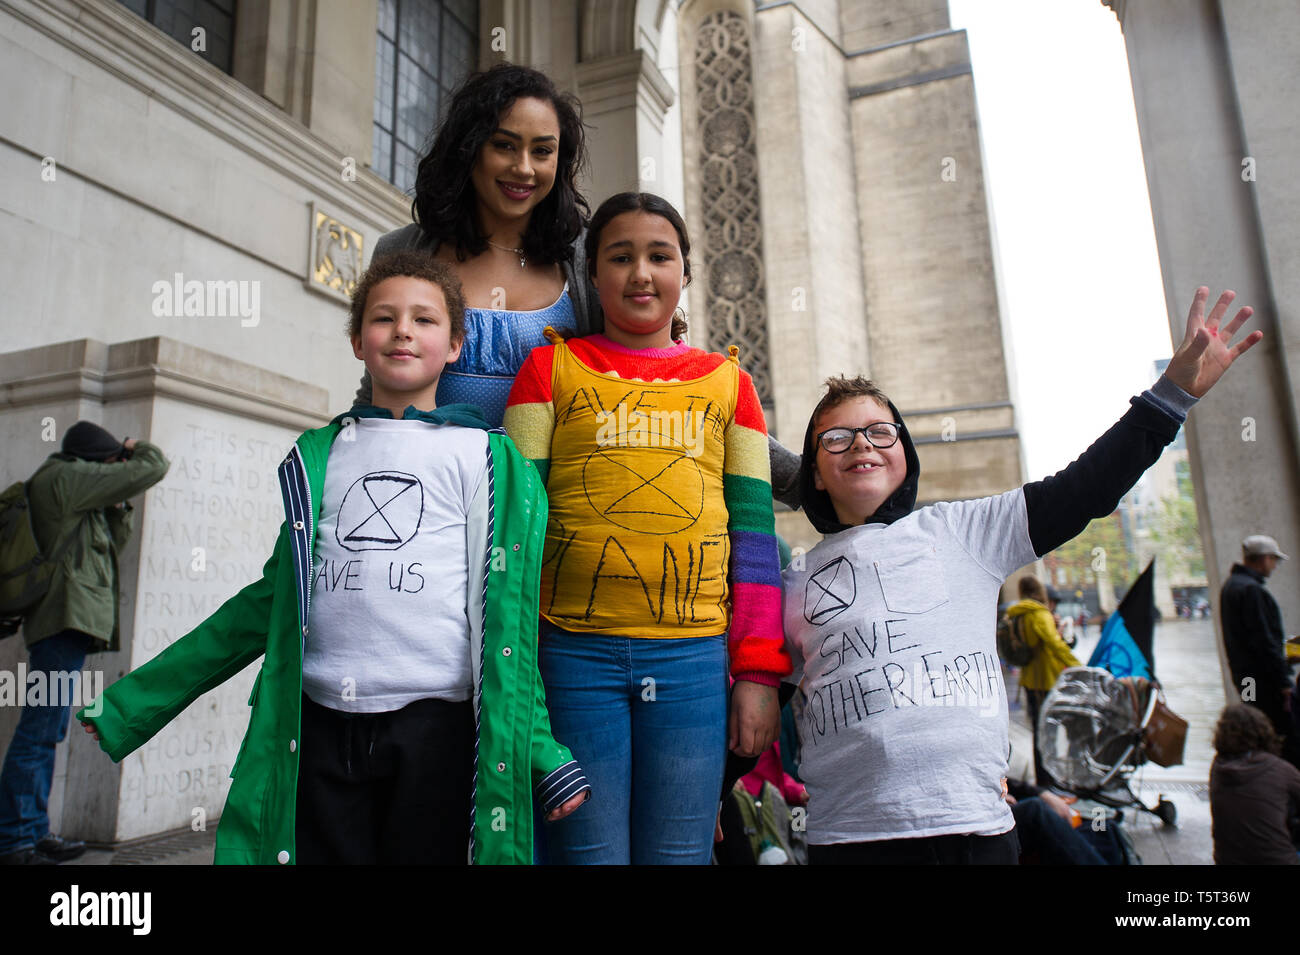 Young activists seen wearing handmade protest t-shirts during the weekly Extinction Rebellion protest outside Manchester Central Library. Extinction Rebellion is a socio-political movement which uses nonviolent resistance to protest against climate breakdown, biodiversity loss, and the risk of human extinction and ecological collapse. Stock Photo